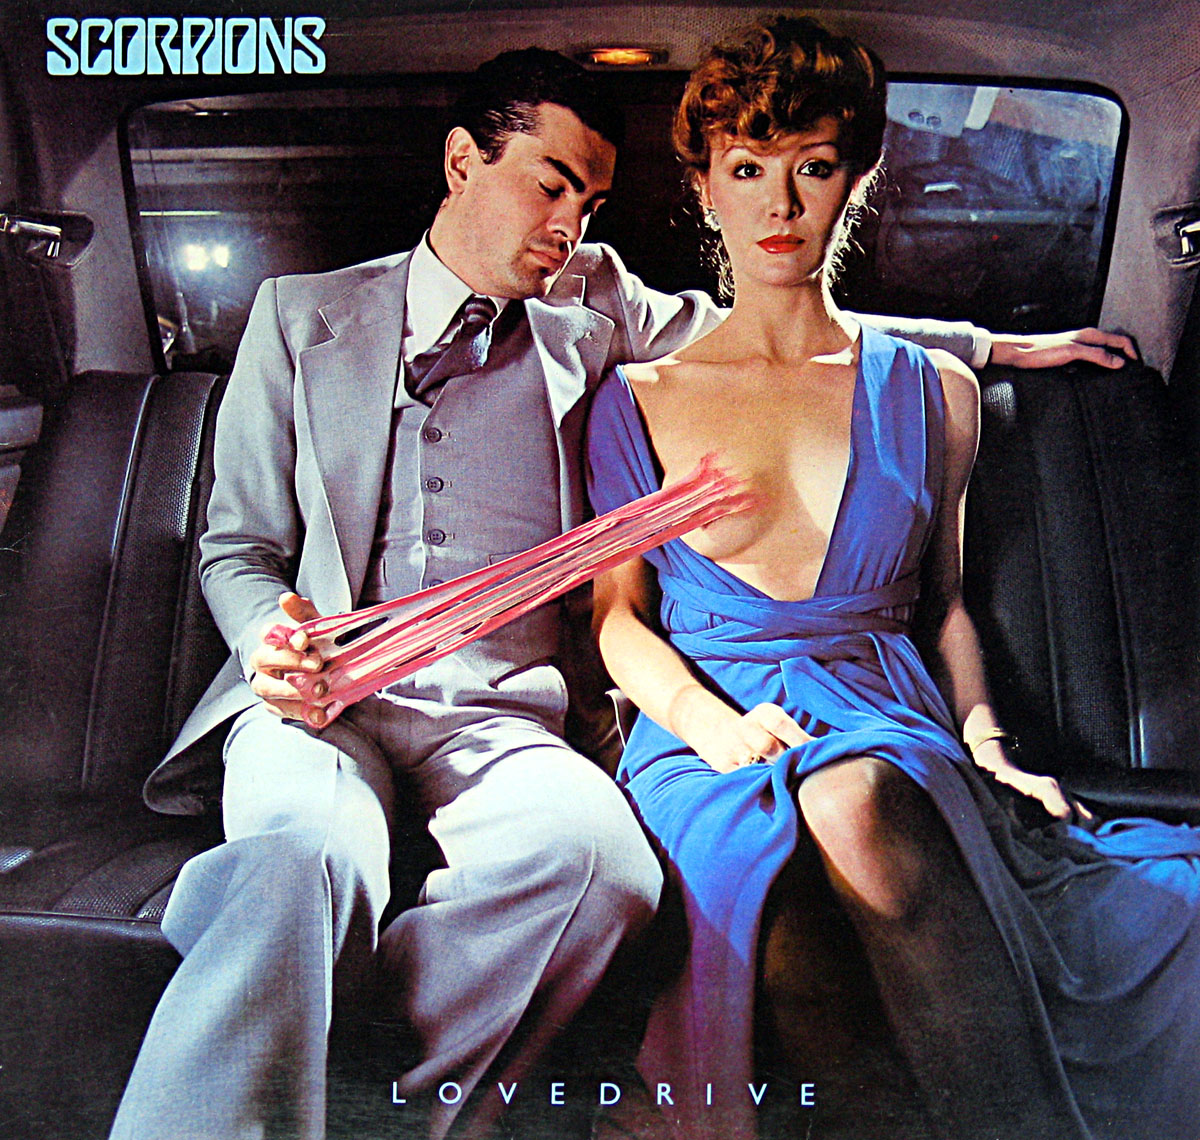 High Resolution Photos of scorpions lovedrive banned cover uk 